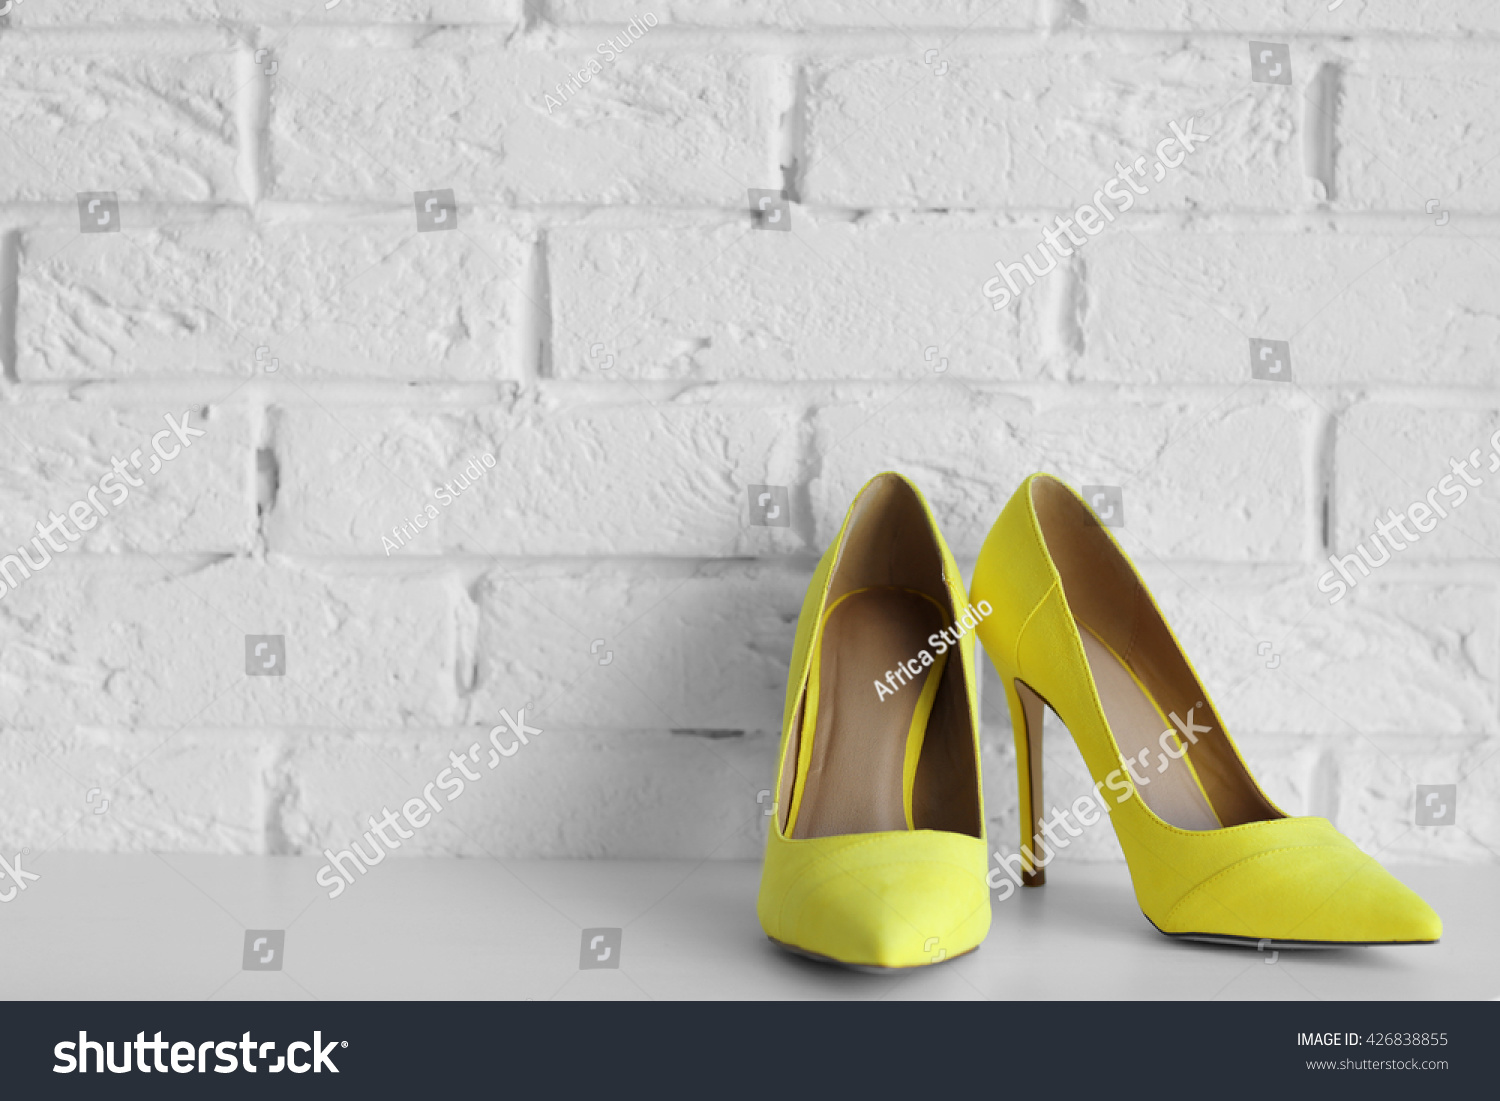 Yellow woman high heels on a brick wall background #426838855